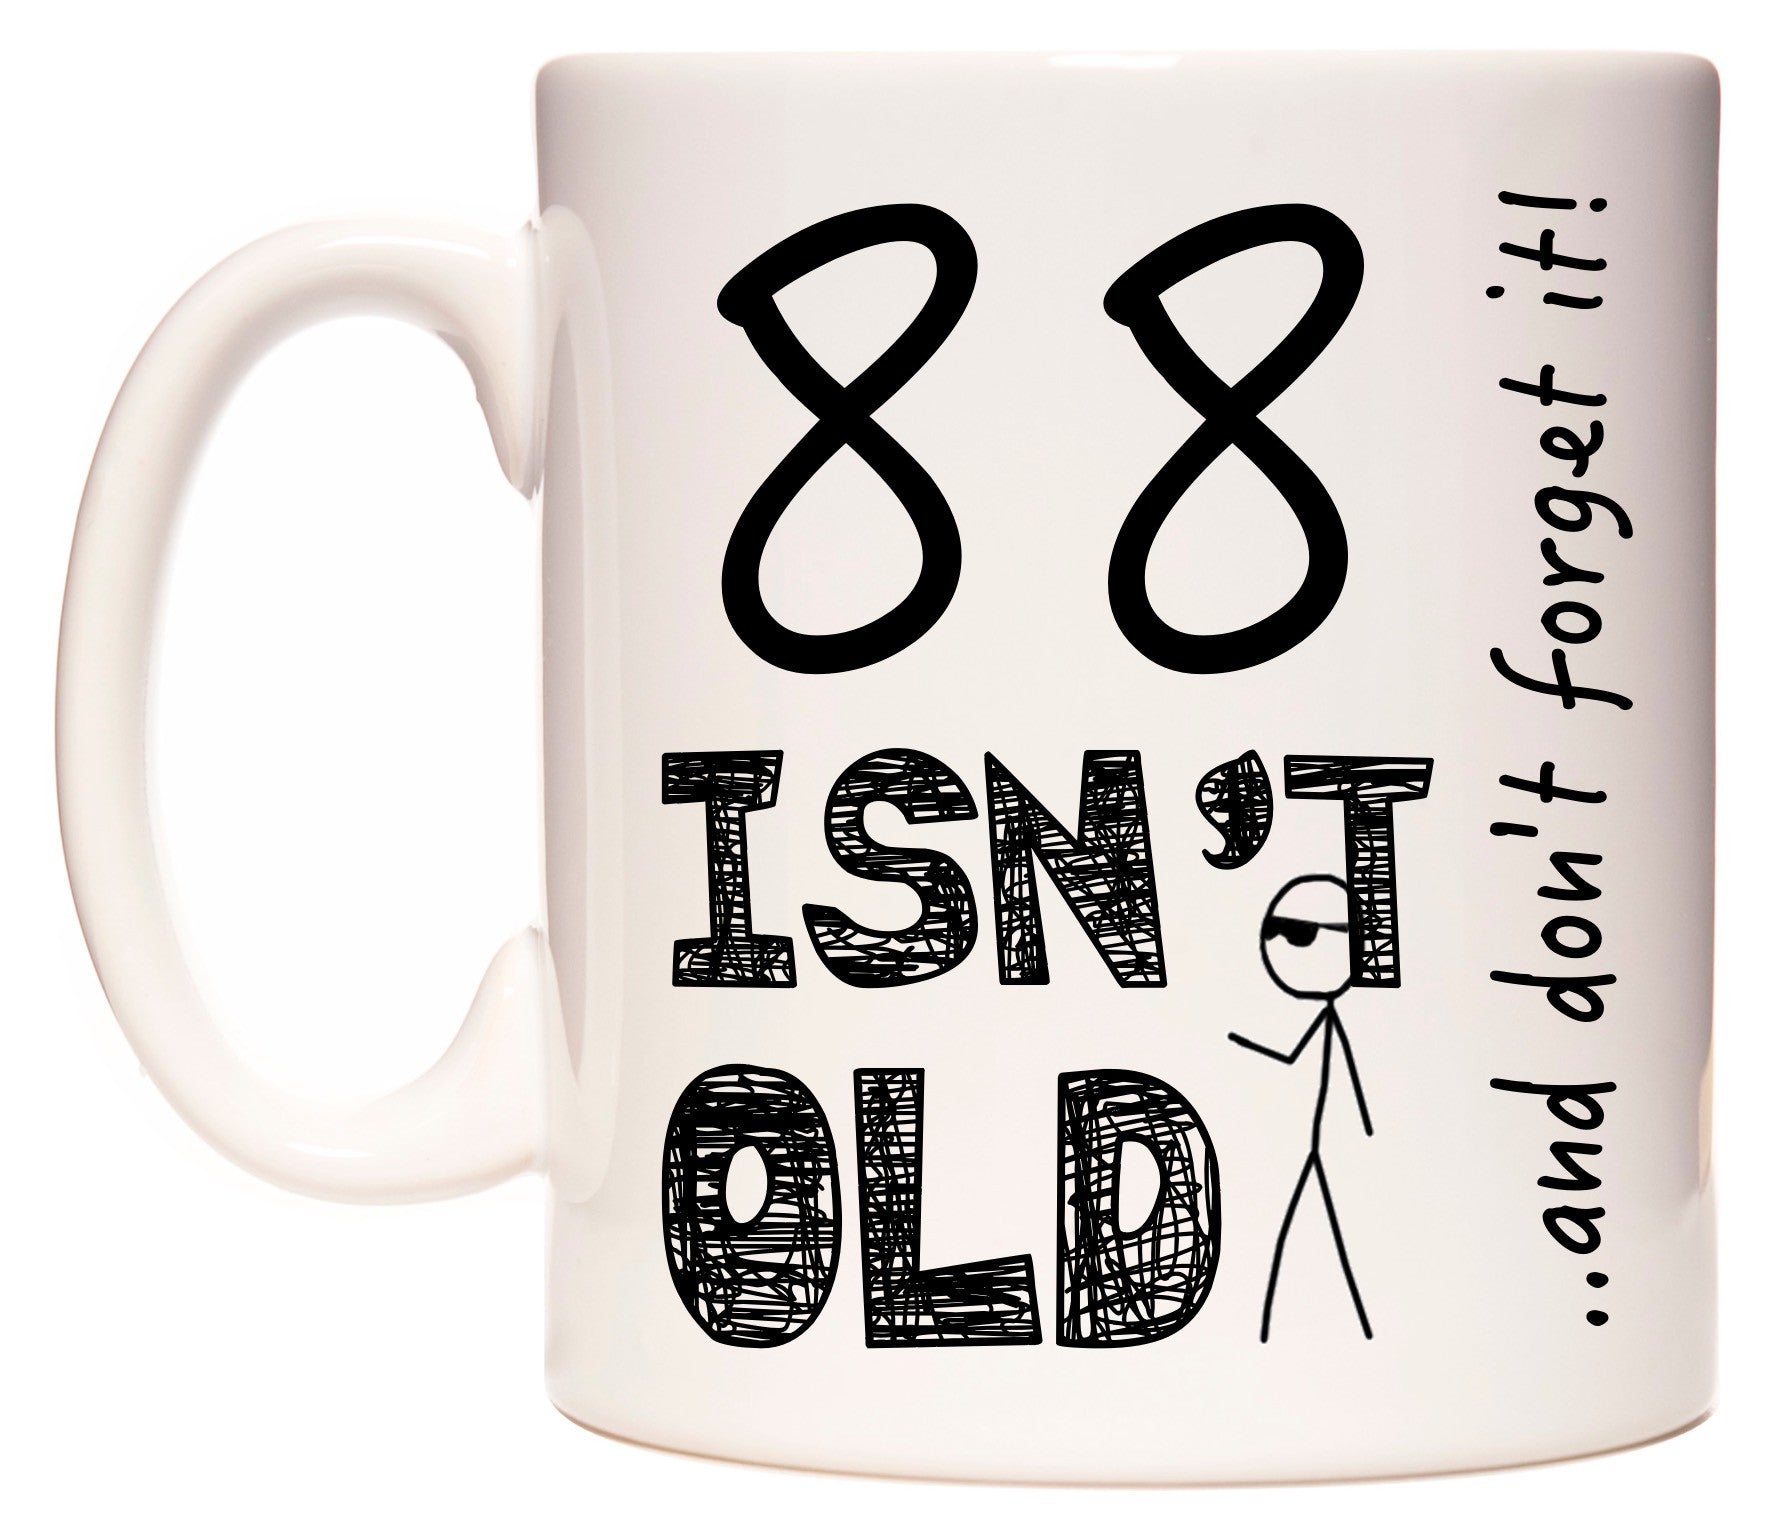 This mug features 88 Isn't Old